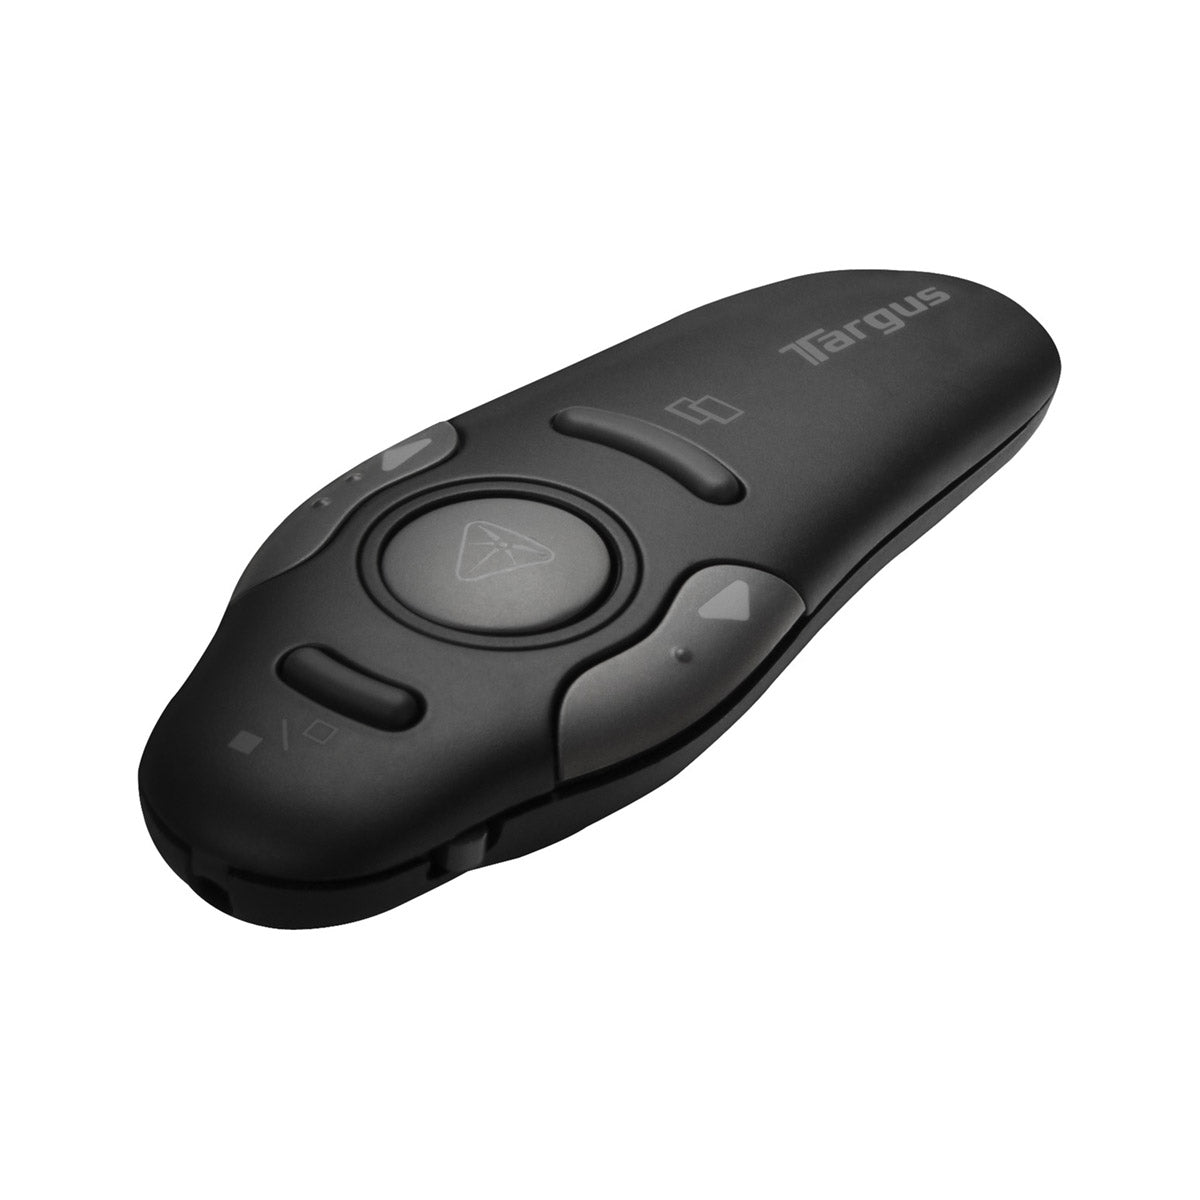 Targus P16 Wireless Presenter with Laser Pointer w/Soft-touch Material 無線簡報遙控器